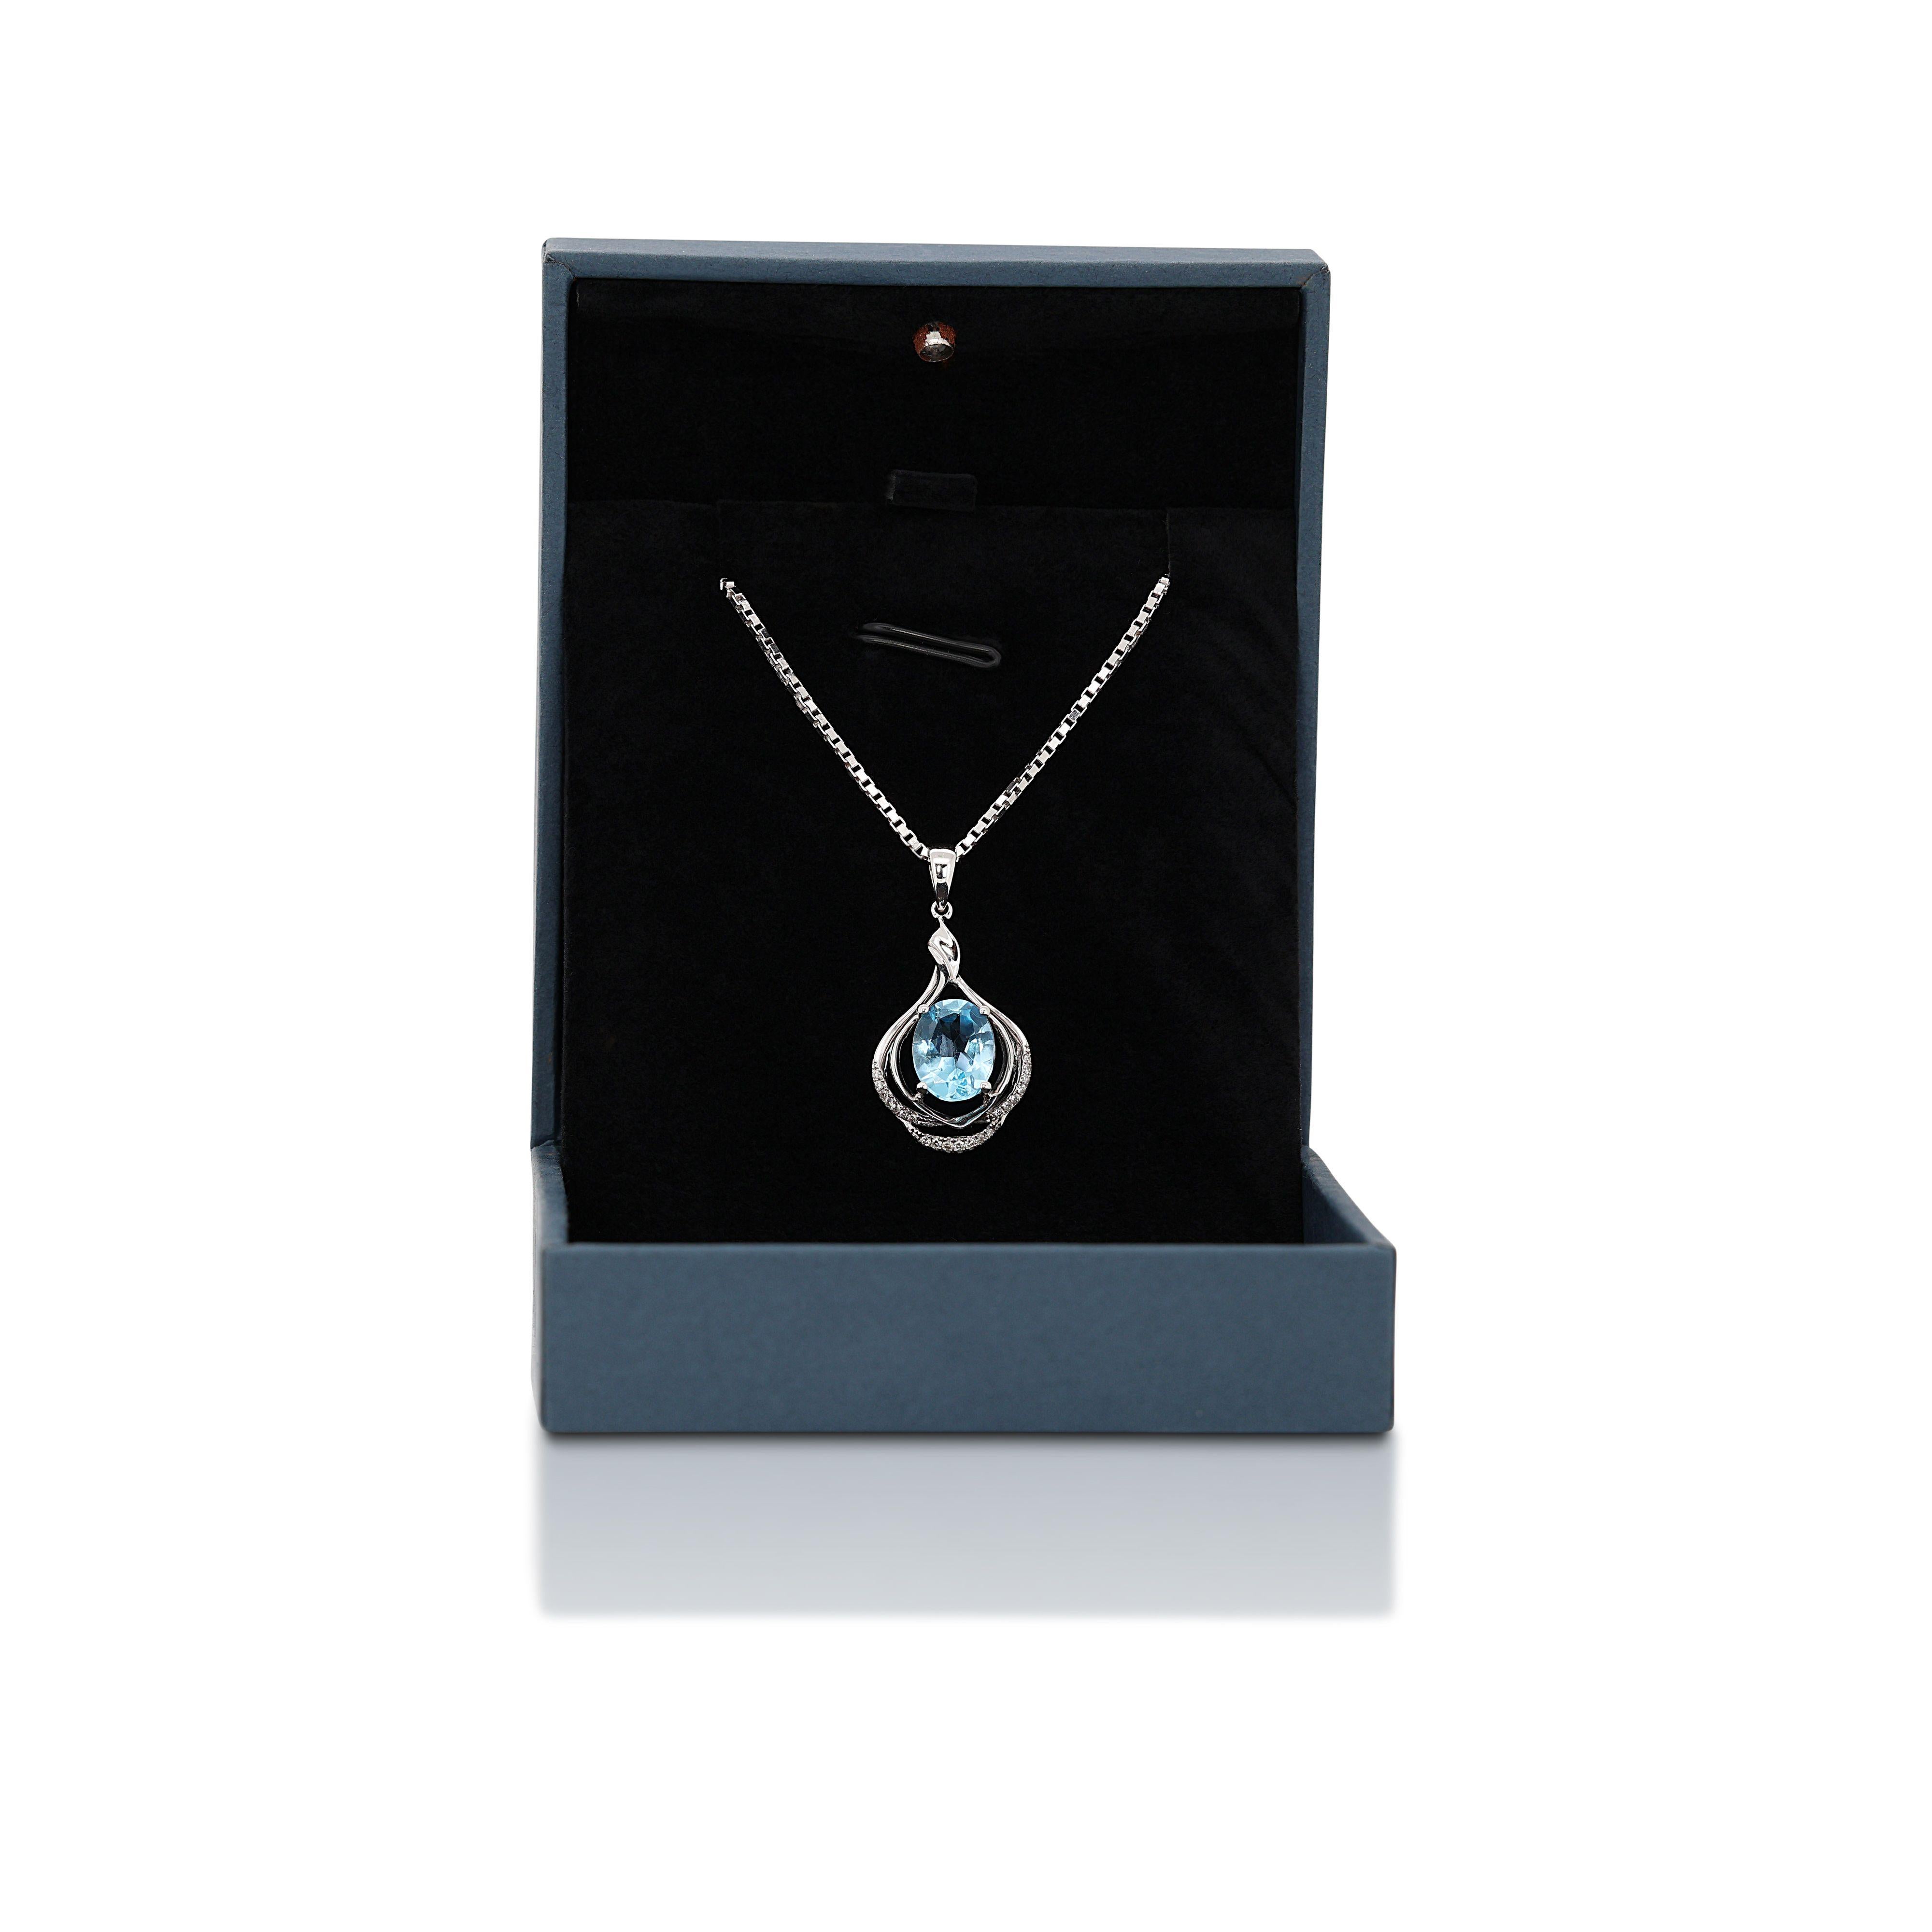 Stunning 10k White Gold Necklace with 3.16 Ct Natural Diamonds and Topaz For Sale 2